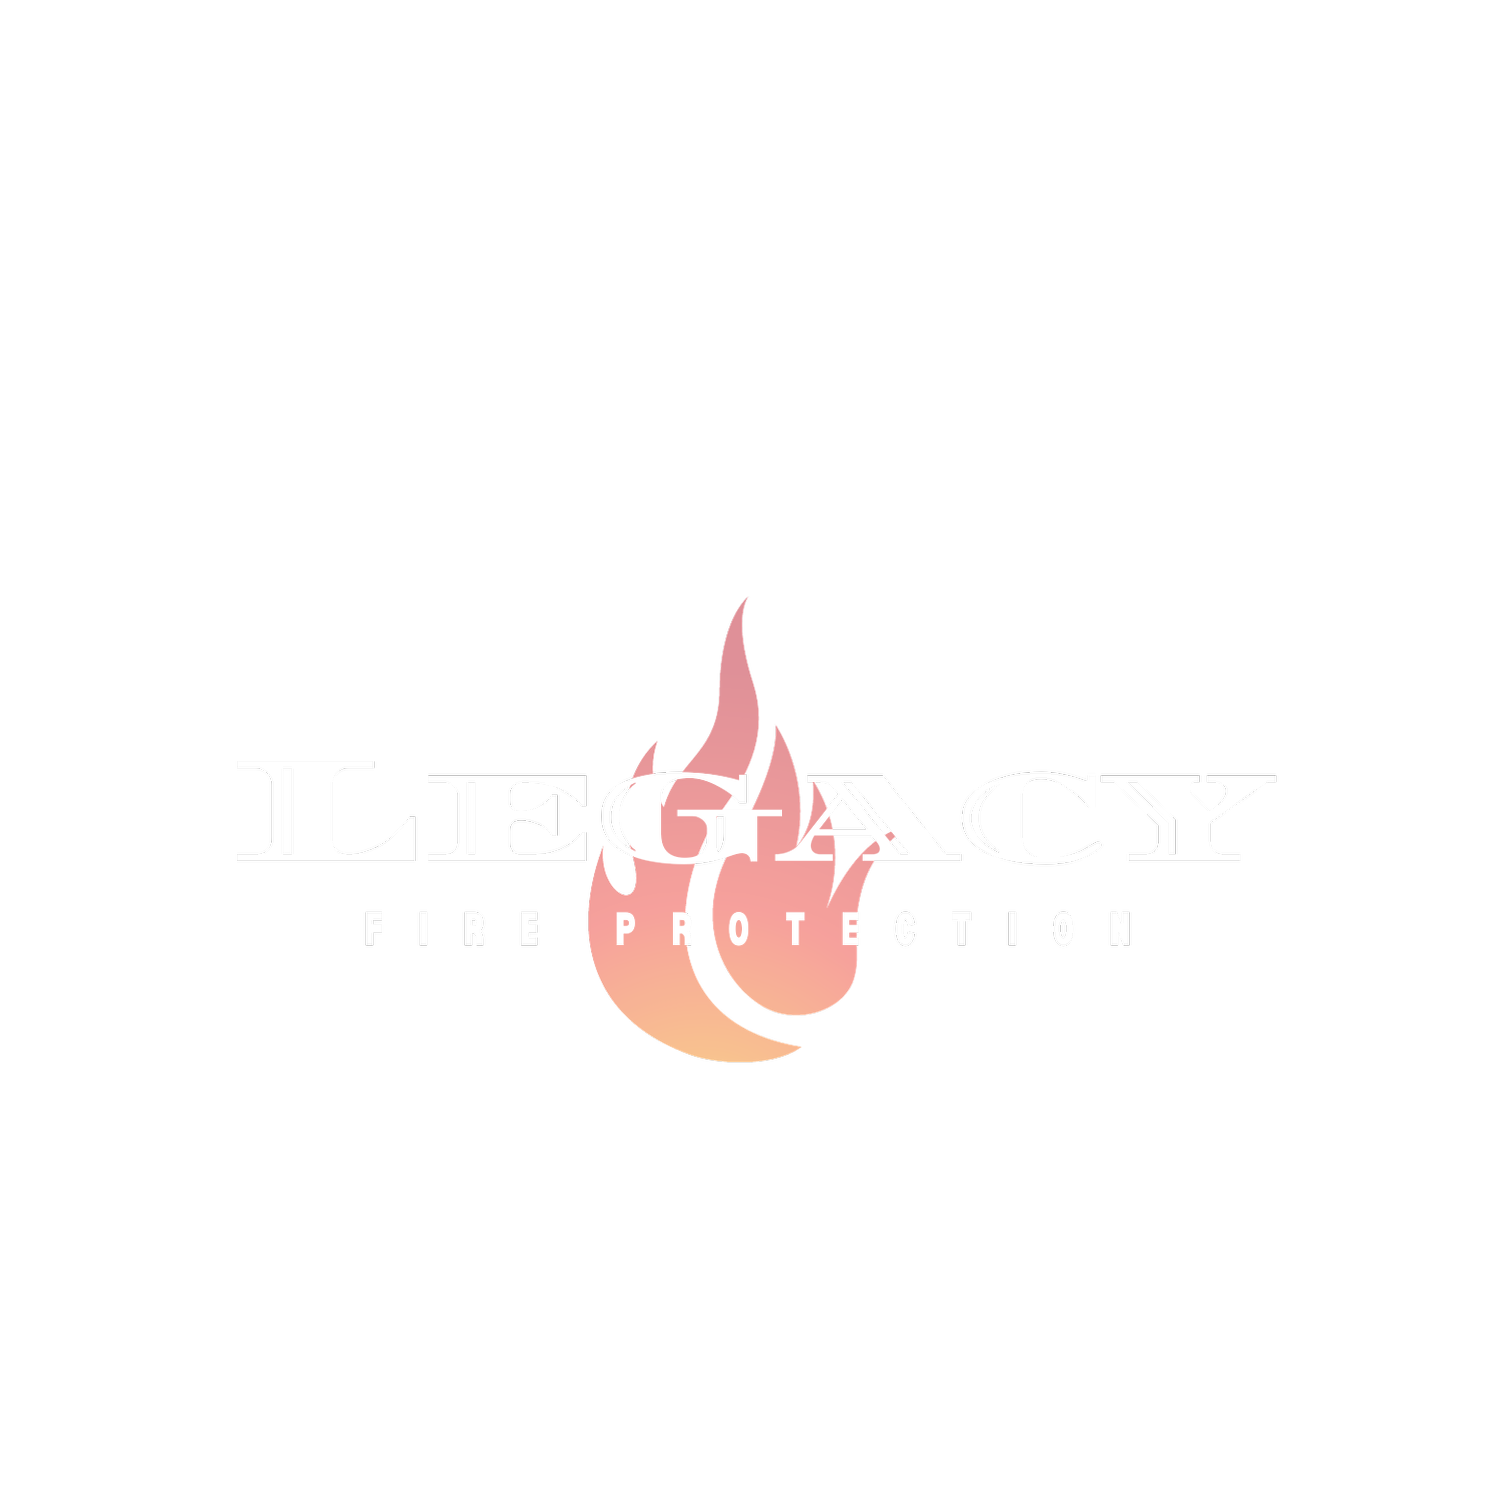 Legacy Fire Protection, LLC